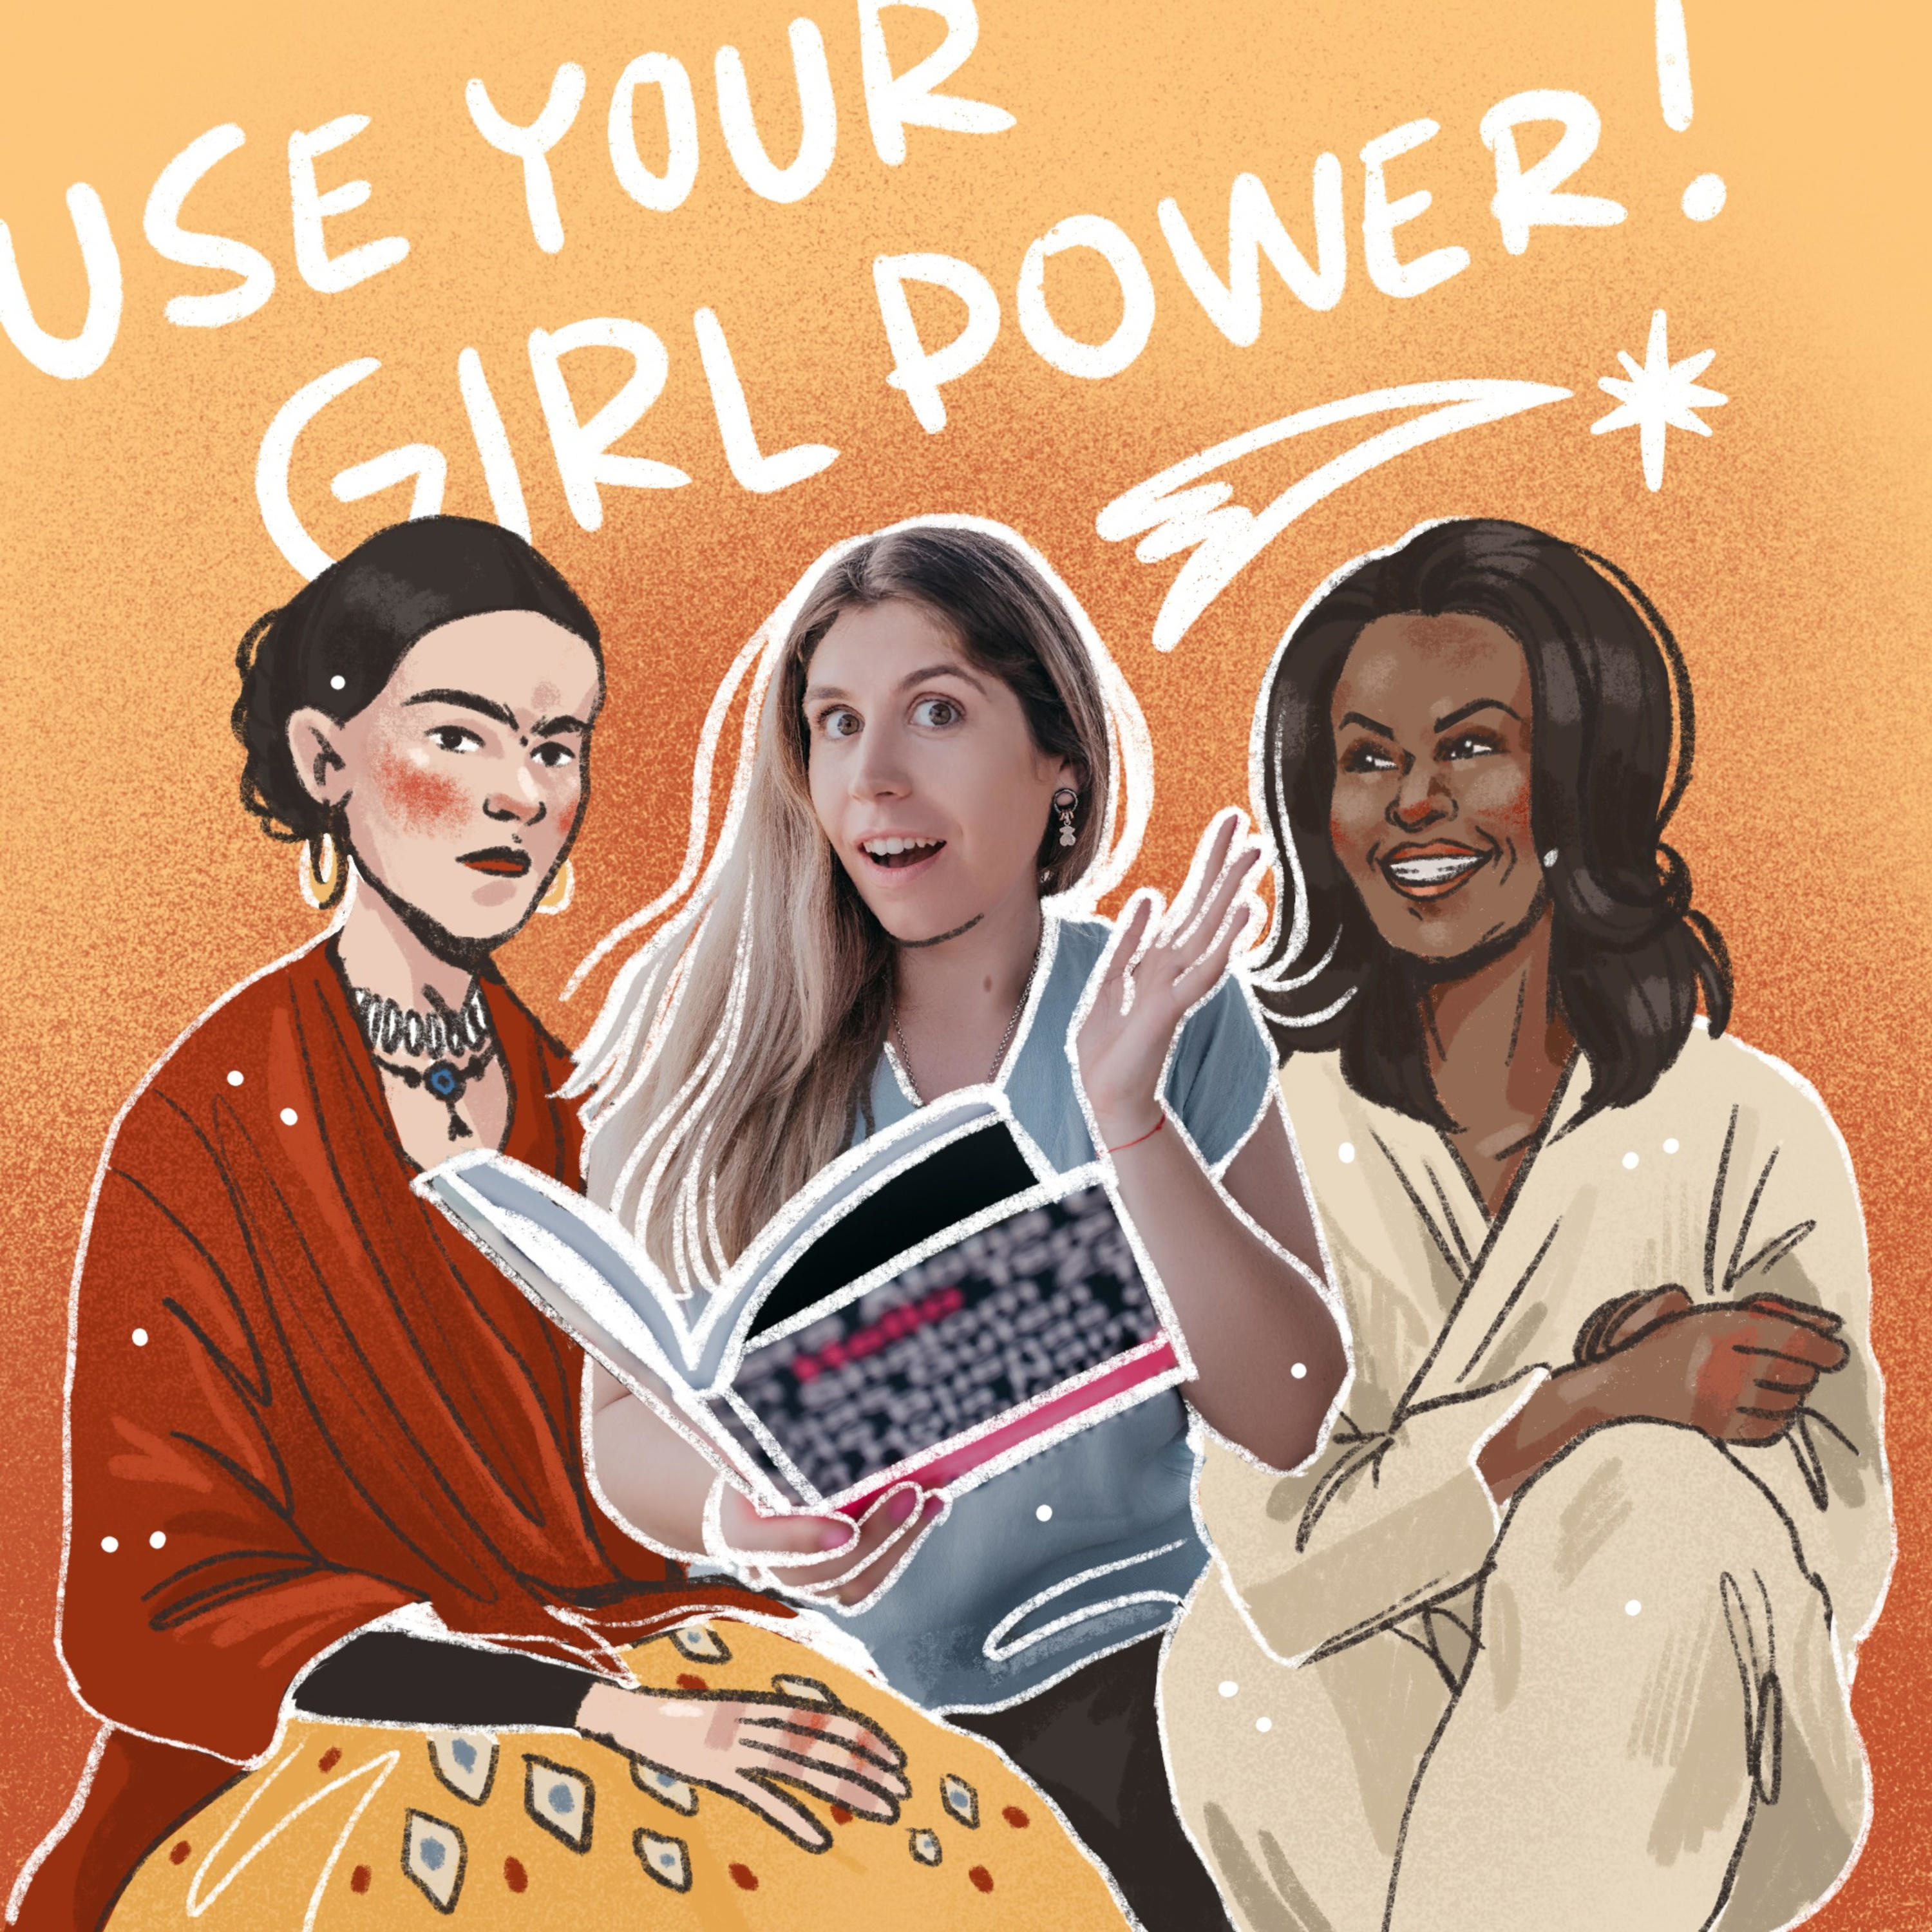 You use this book. Girl Power книга. Книги в стиле girl Power. Use your girl Power. Use your girl Power читать.